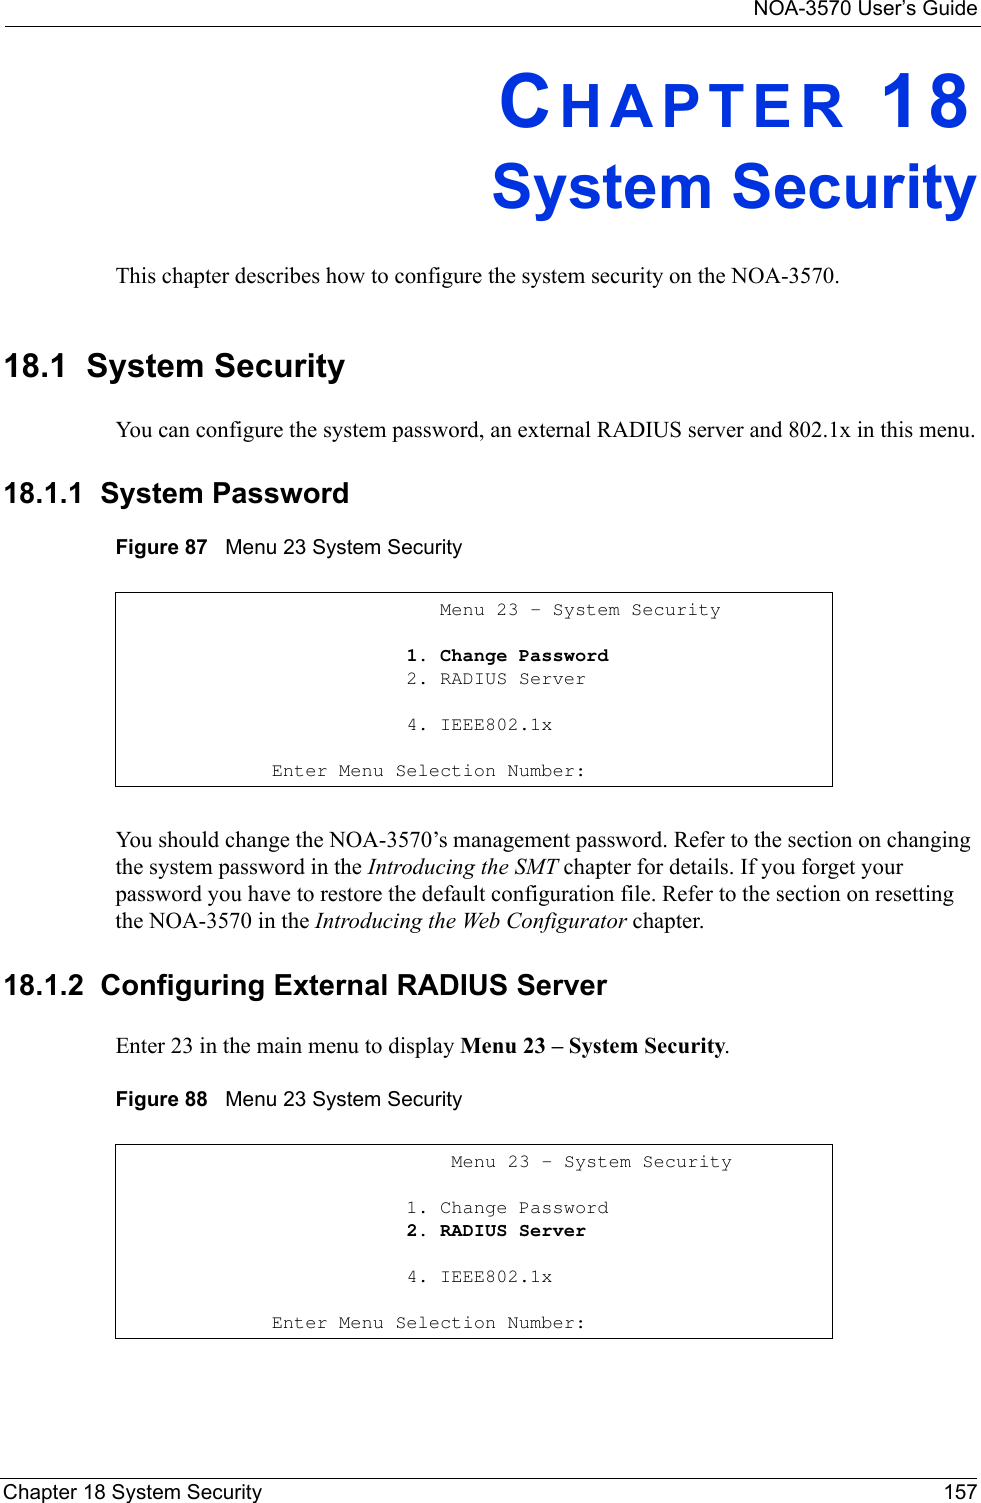 NOA-3570 User’s GuideChapter 18 System Security 157CHAPTER 18System SecurityThis chapter describes how to configure the system security on the NOA-3570. 18.1  System Security You can configure the system password, an external RADIUS server and 802.1x in this menu.18.1.1  System PasswordFigure 87   Menu 23 System SecurityYou should change the NOA-3570’s management password. Refer to the section on changing the system password in the Introducing the SMT chapter for details. If you forget your password you have to restore the default configuration file. Refer to the section on resetting the NOA-3570 in the Introducing the Web Configurator chapter.18.1.2  Configuring External RADIUS ServerEnter 23 in the main menu to display Menu 23 – System Security.Figure 88   Menu 23 System Security               Menu 23 - System Security            1. Change Password            2. RADIUS Server            4. IEEE802.1xEnter Menu Selection Number:                Menu 23 - System Security            1. Change Password            2. RADIUS Server            4. IEEE802.1xEnter Menu Selection Number: